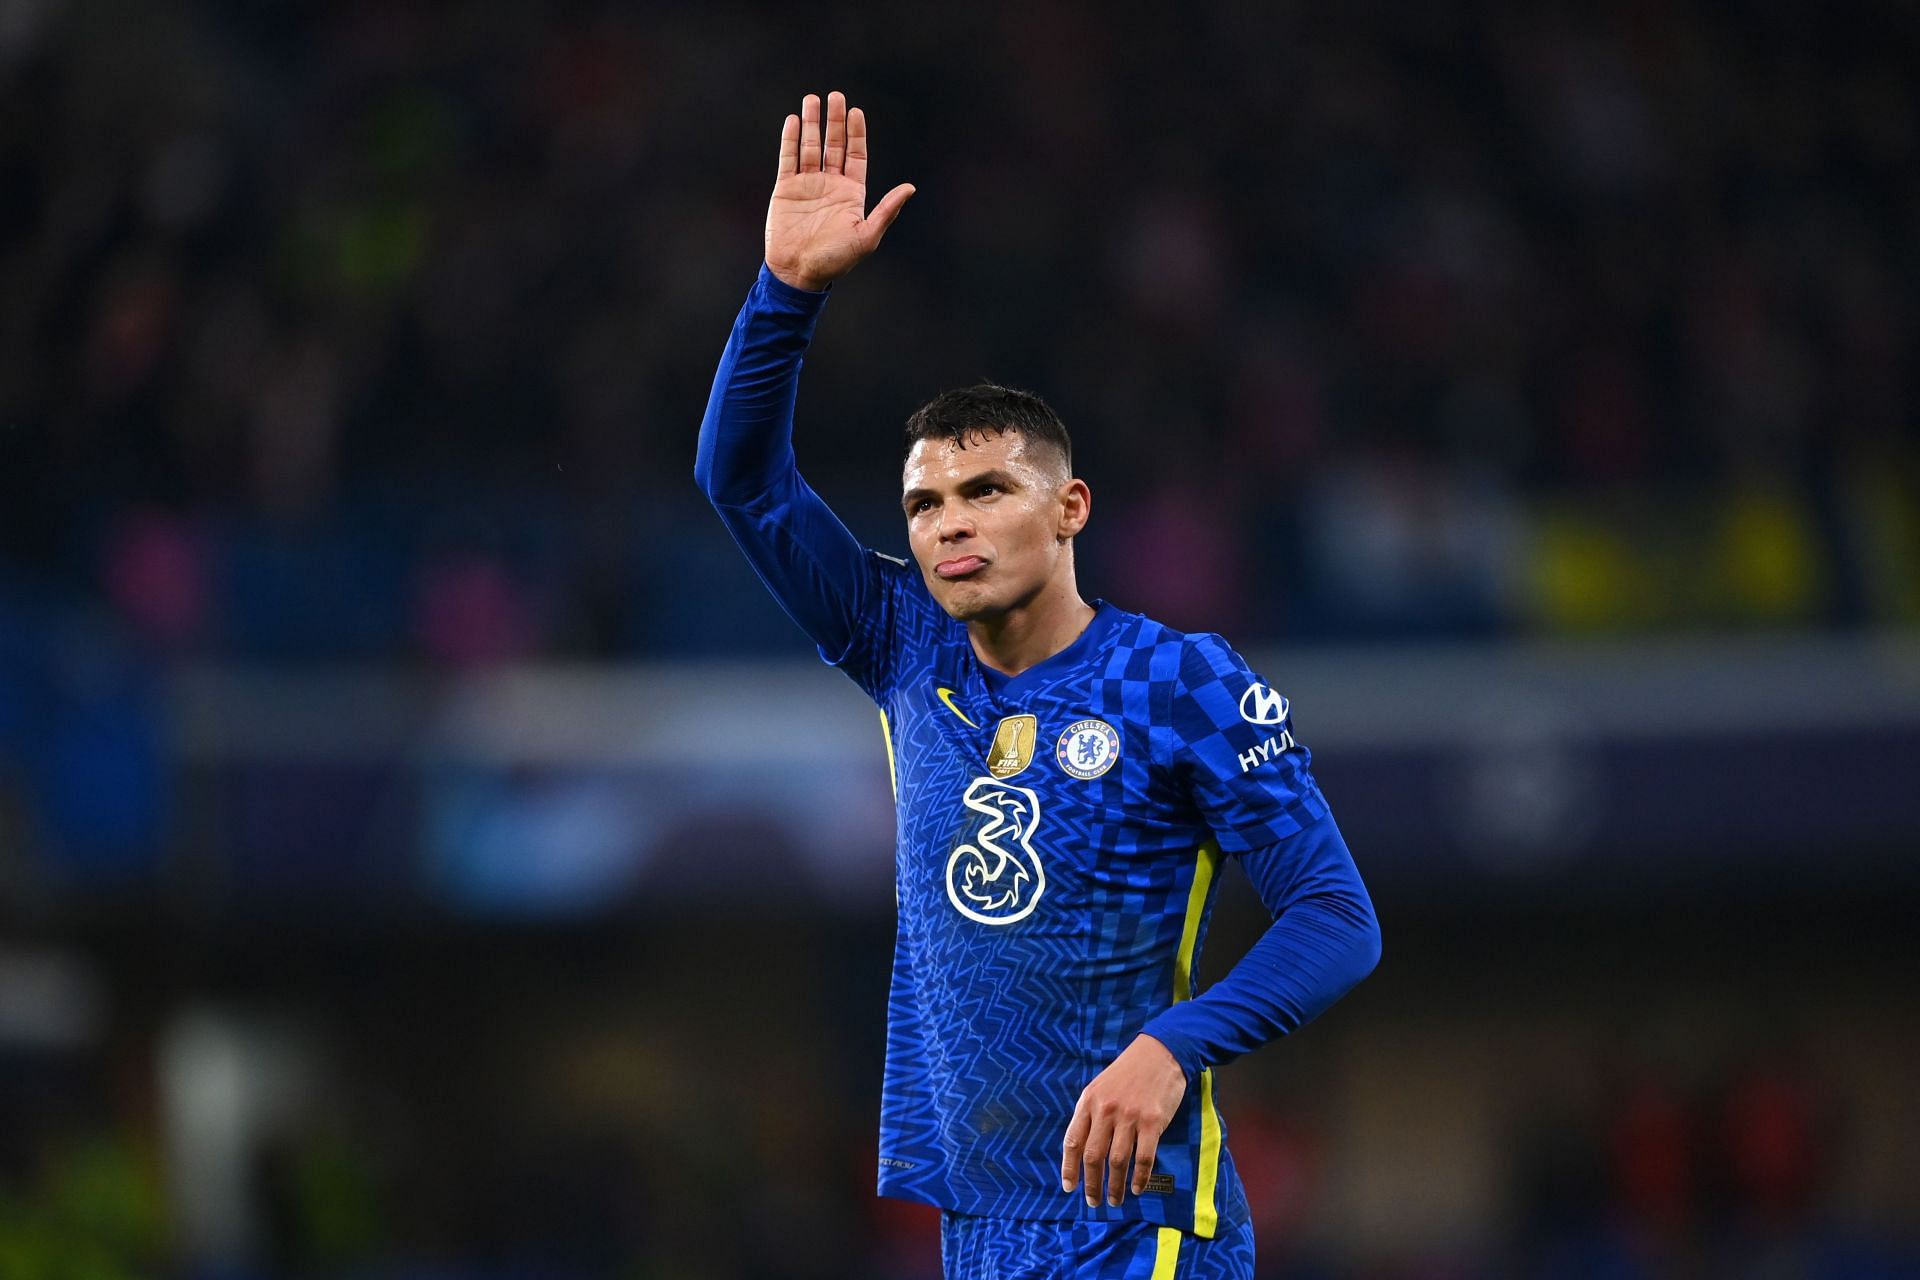 Thiago Silva has been rock-solid since arriving in the Premier League two years ago.